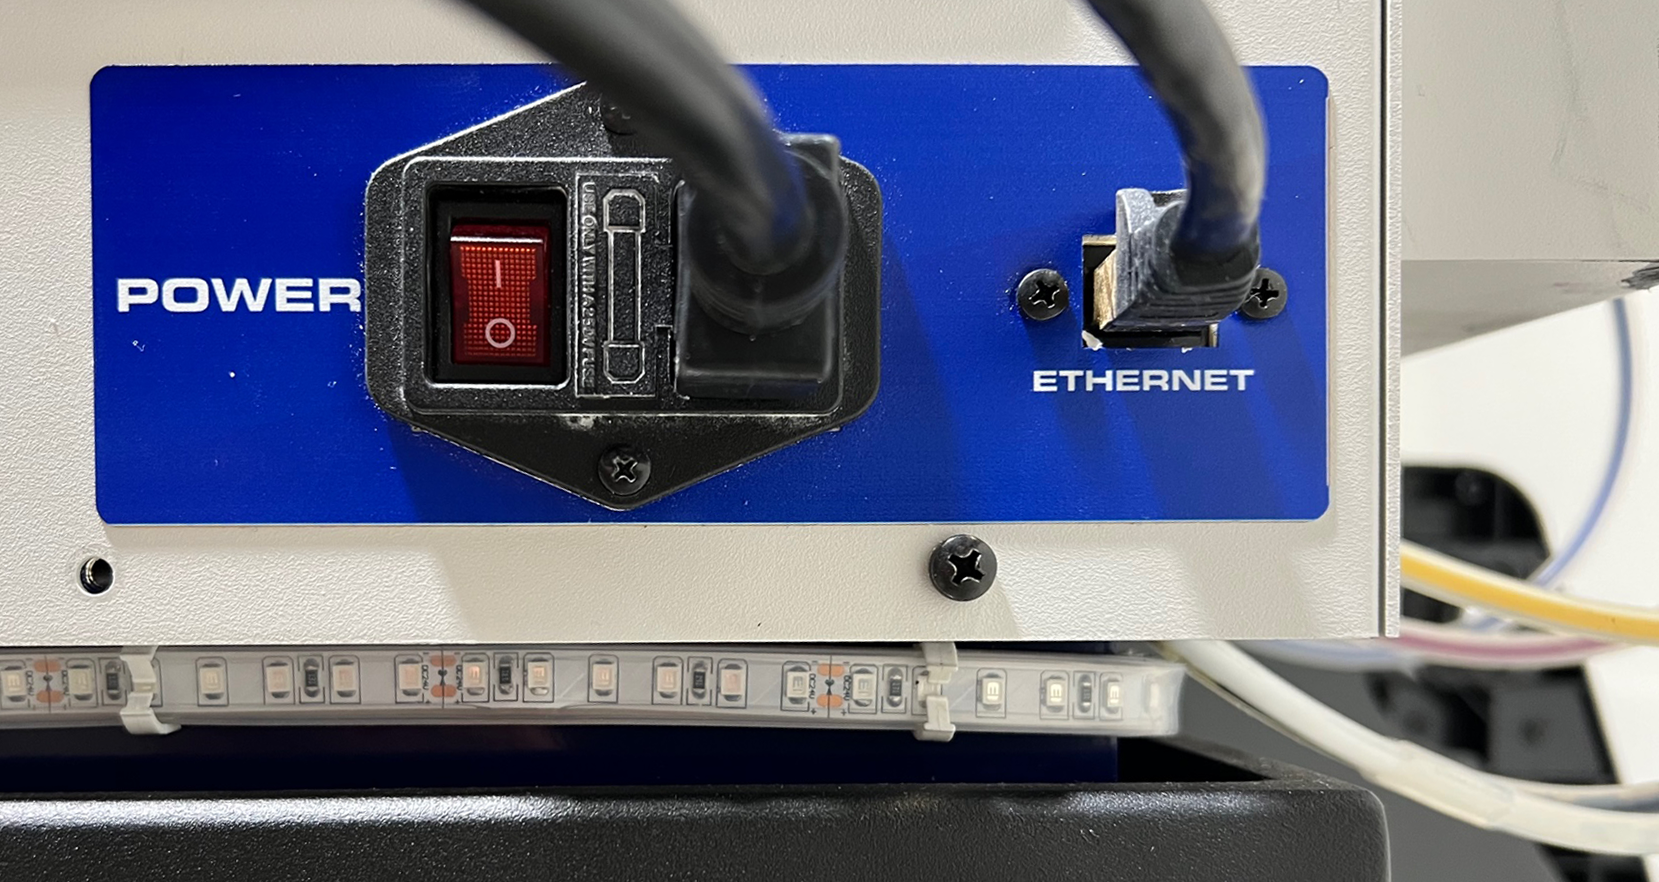 Power and Ethernet ports